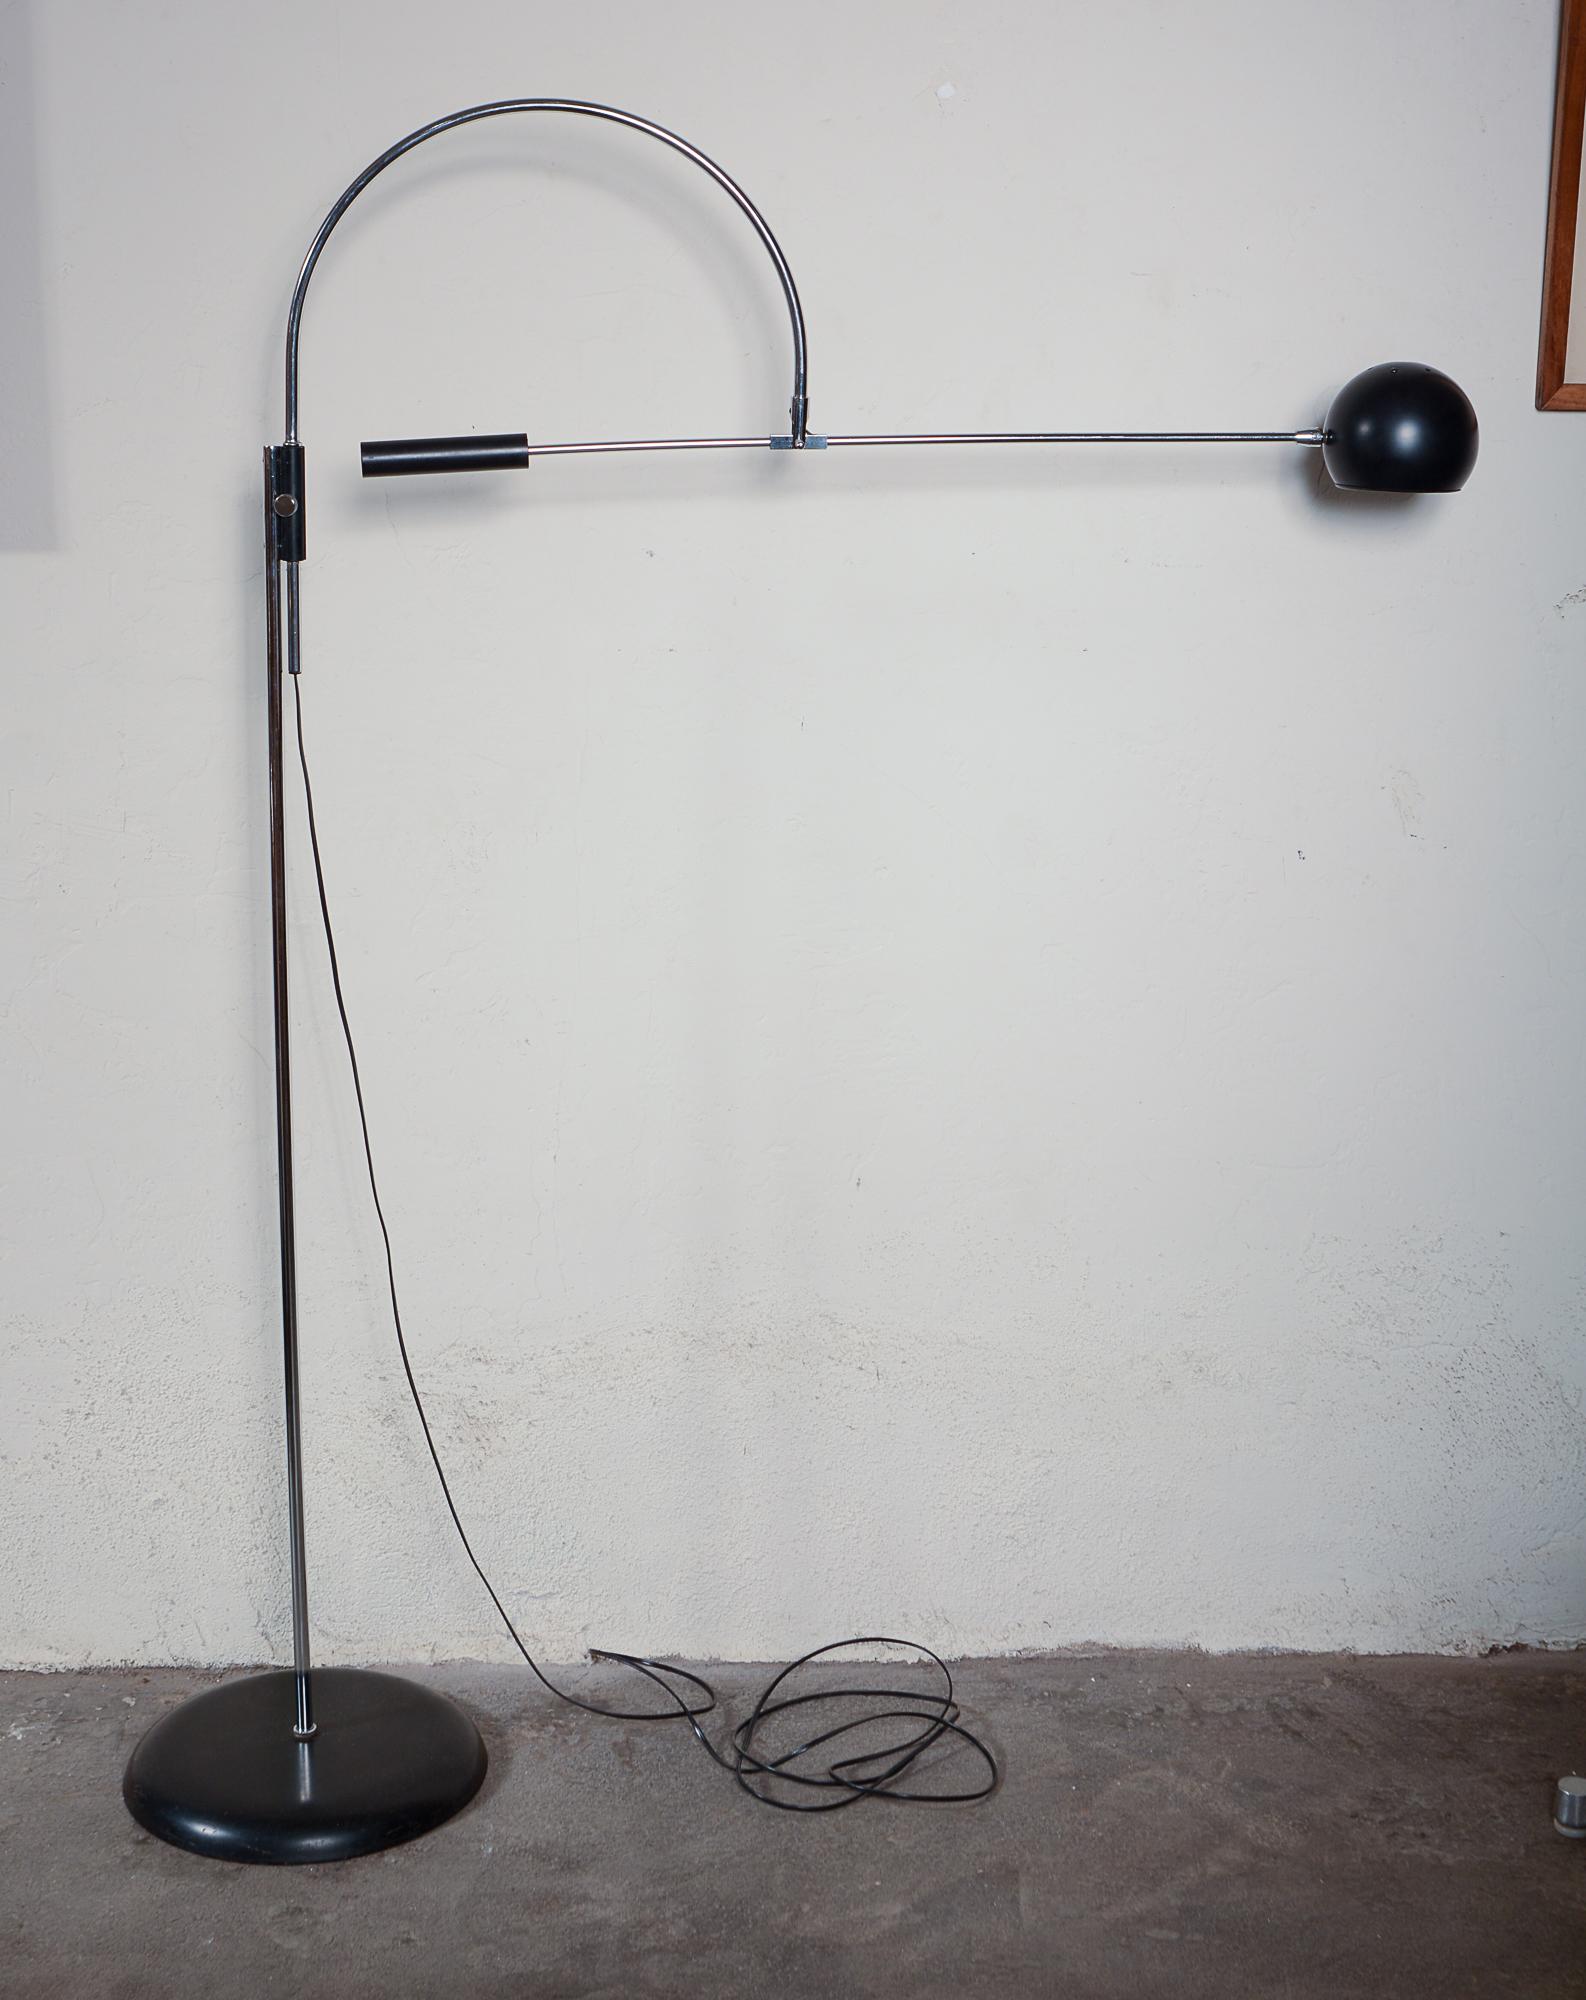 Adjustable floor lamp designed by Robert Sonneman. The arc portion rotates 360 degrees. The straight arm adjusts the shade up and down as well as side to side. This makes an excellent reading lamp or can be used to spot light a portion of a room or